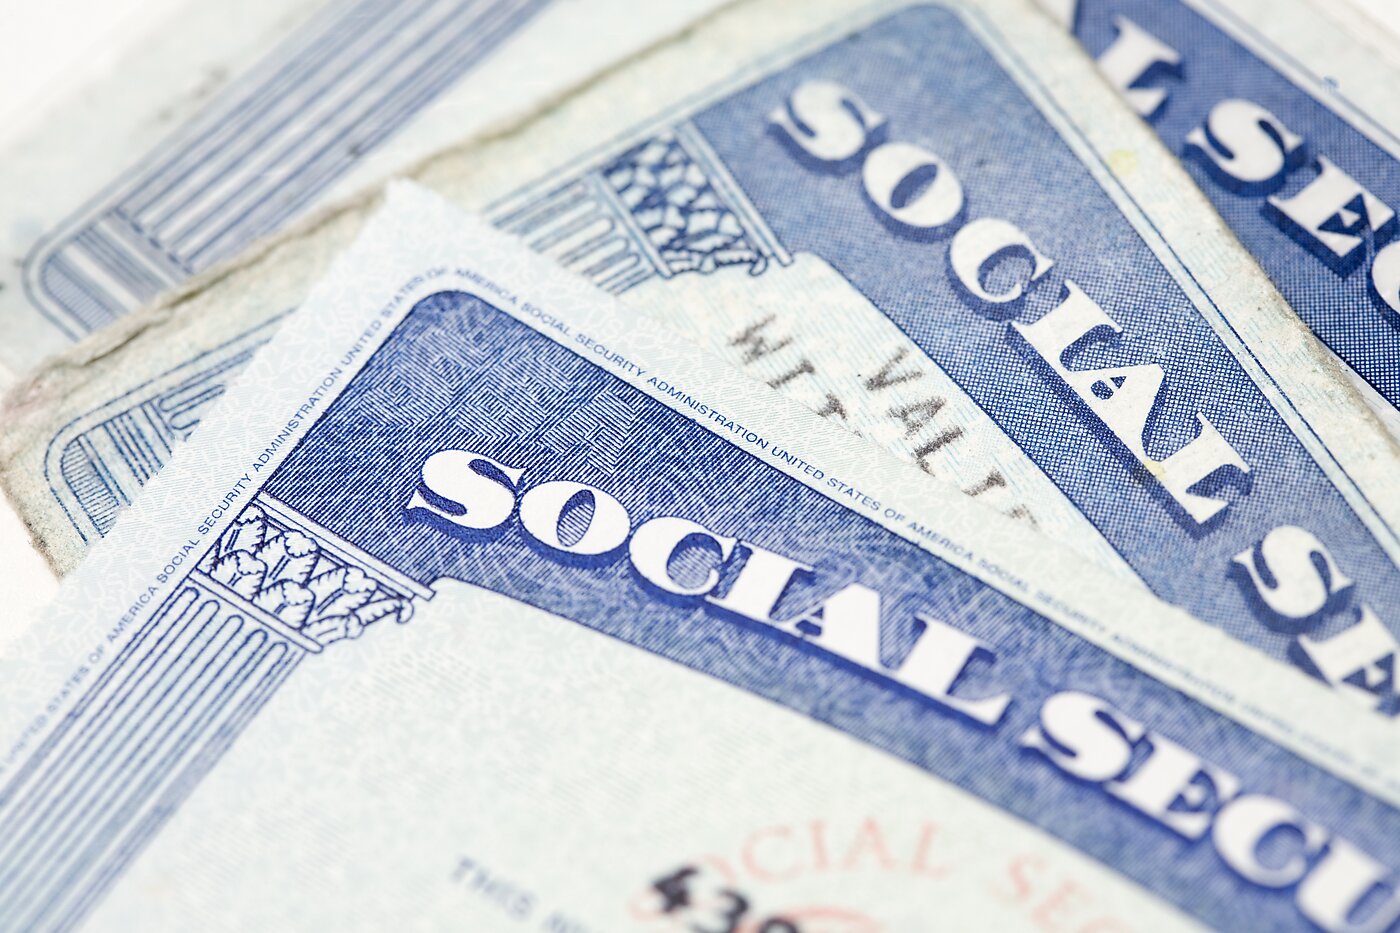 Three Social Security cards stacked.